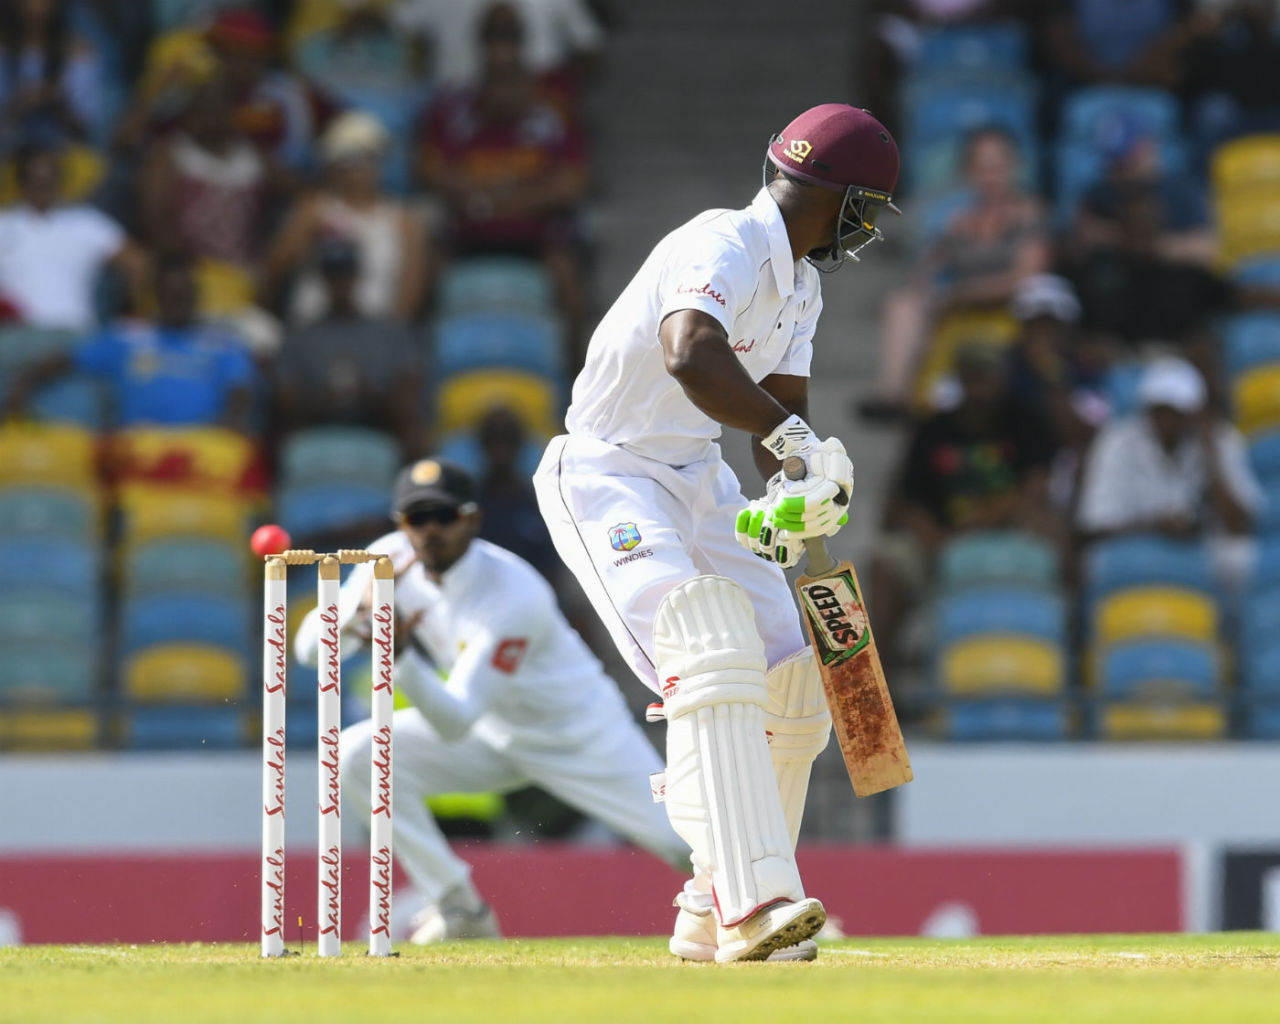 Devon Smith's trouble against the moving ball continued, West Indies v Sri Lanka, 3rd Test, Bridgetown, 1st day, June 23, 2018